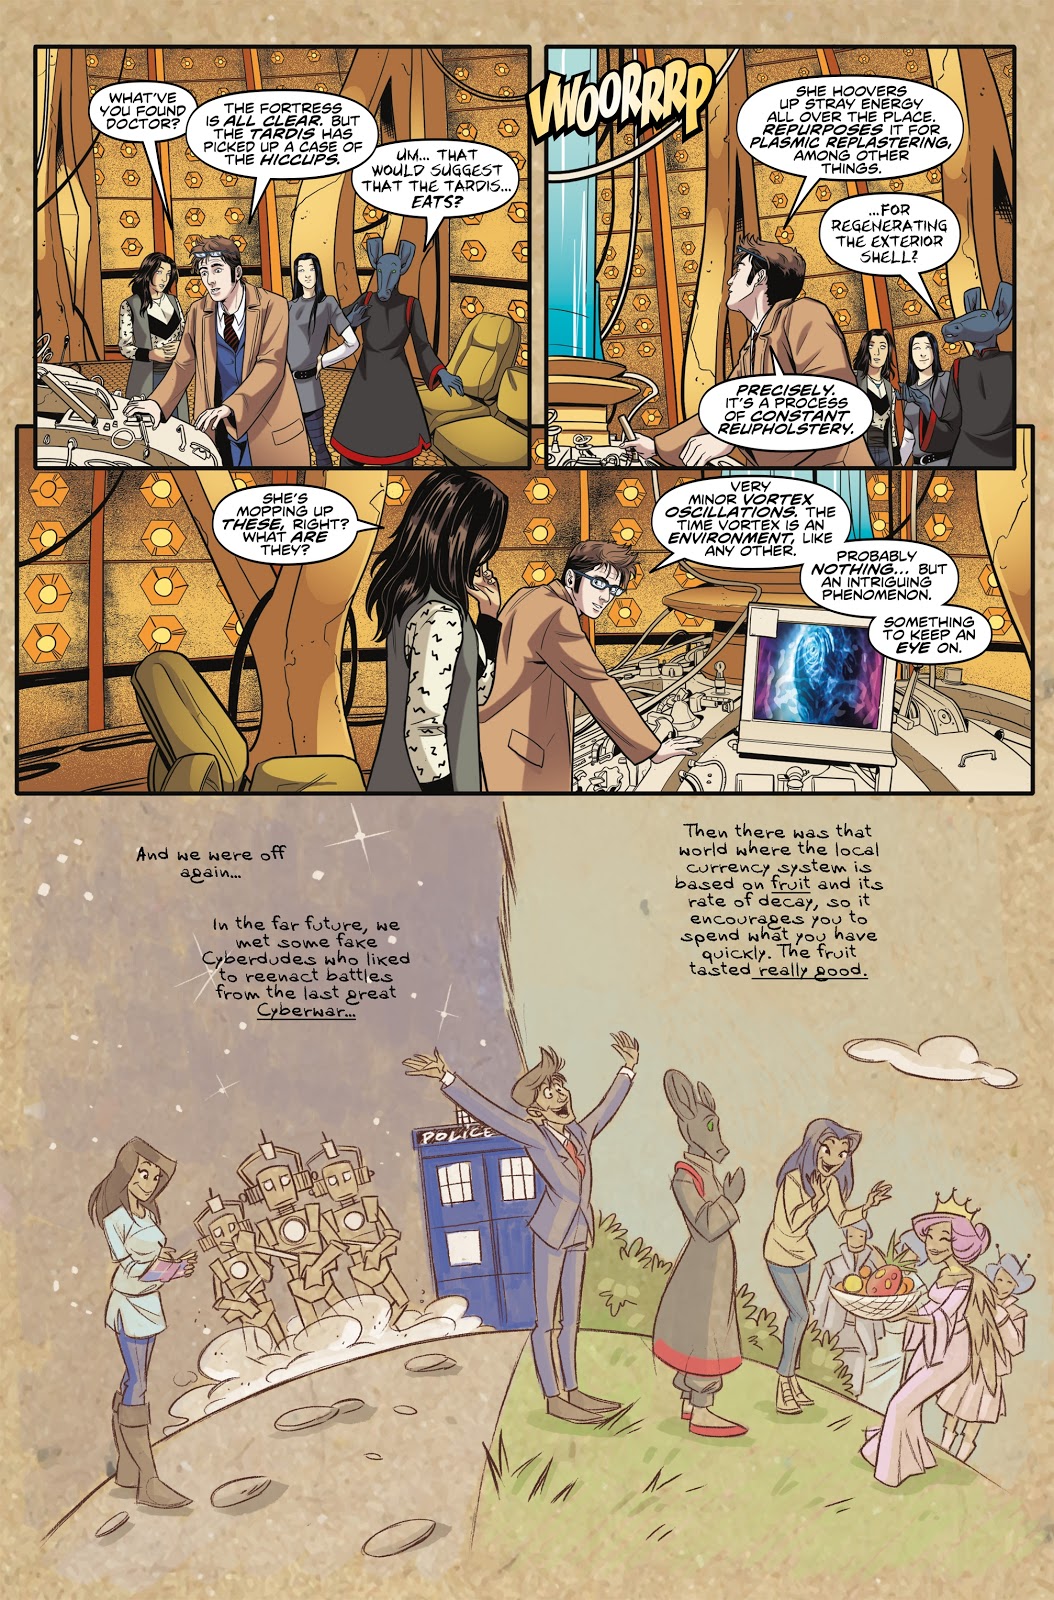 Doctor Who The Tenth Doctor Vol 9 Vortex Butterflies review